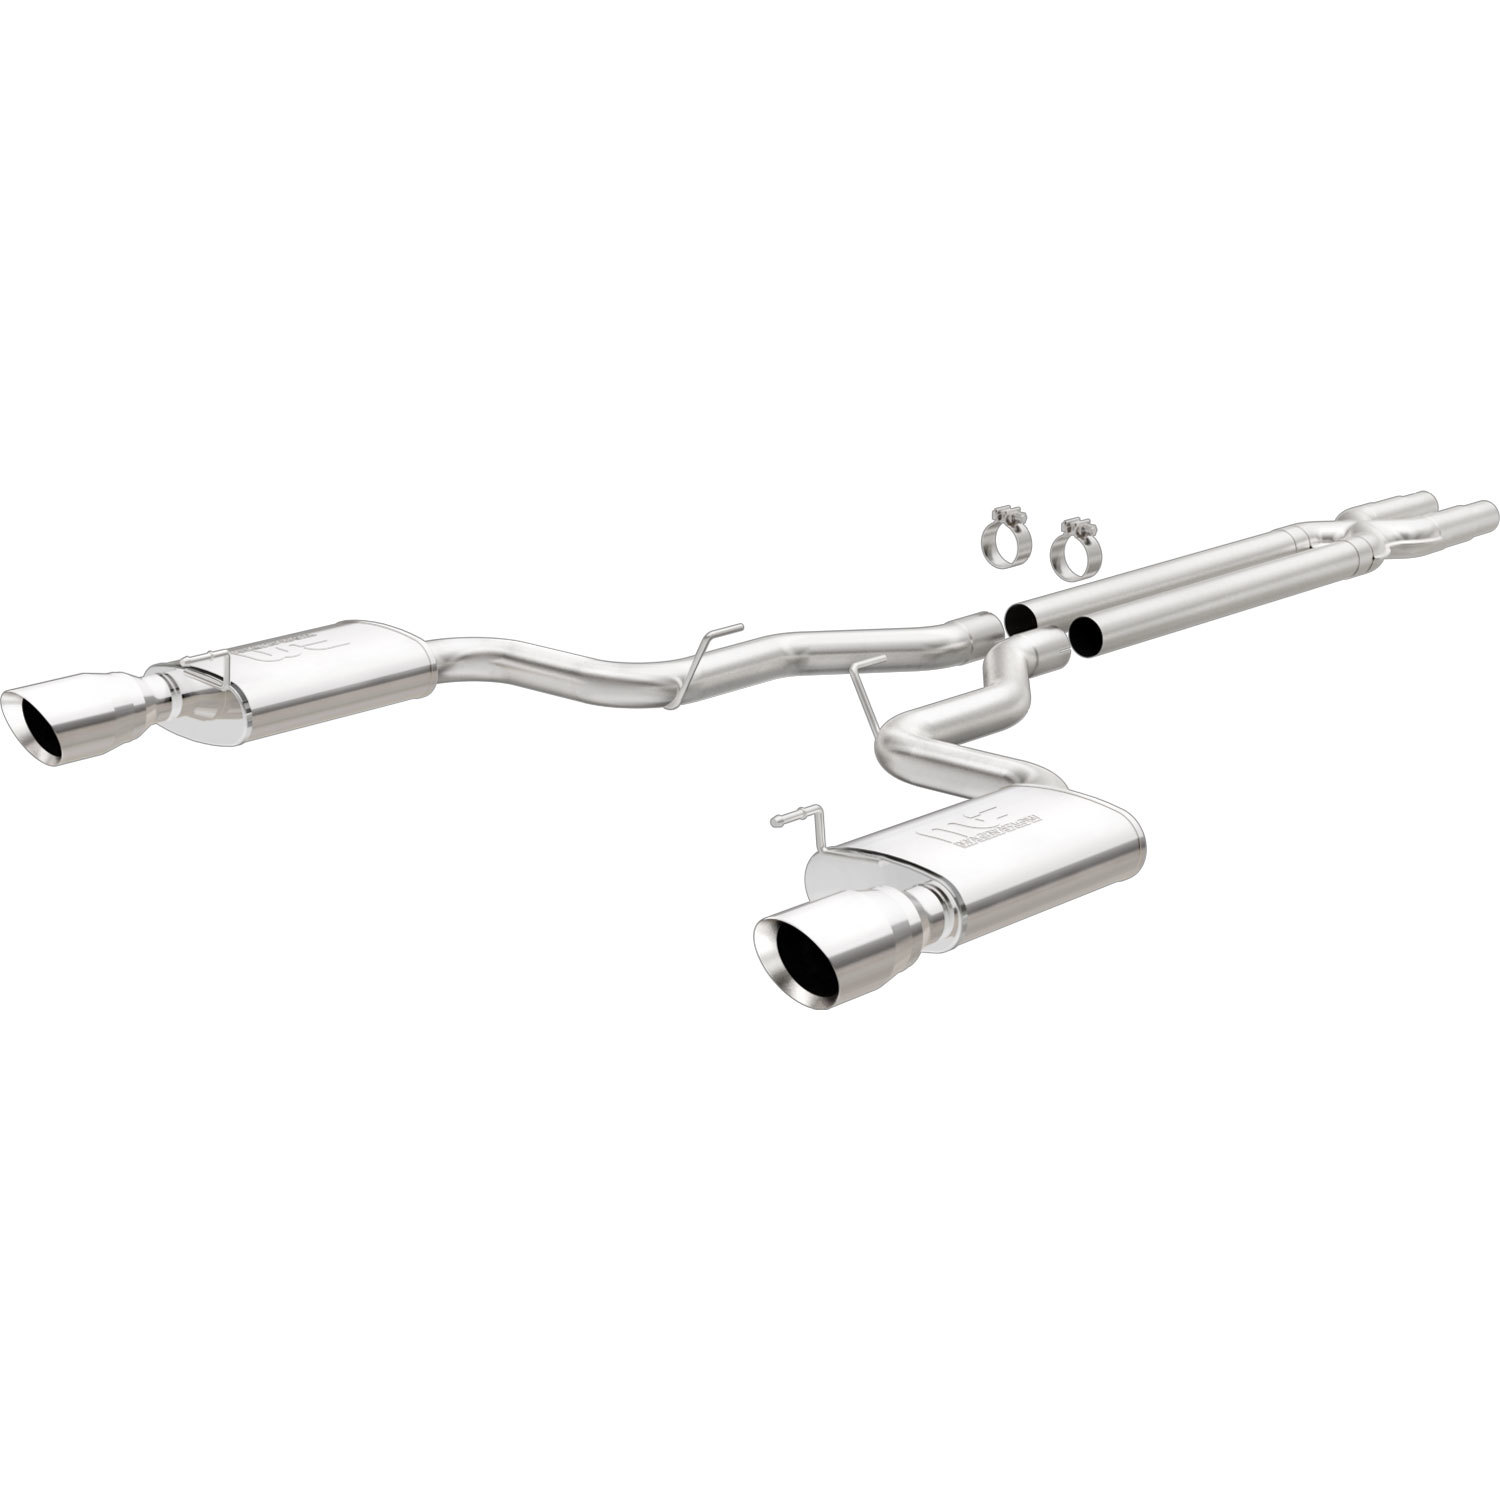 Magnaflow Exhaust System, Street Series, Cat-Back, 3" Dia. 4-1/2" Tips, Stainless, Polished, Ford Coyote, Ford Mustang 2